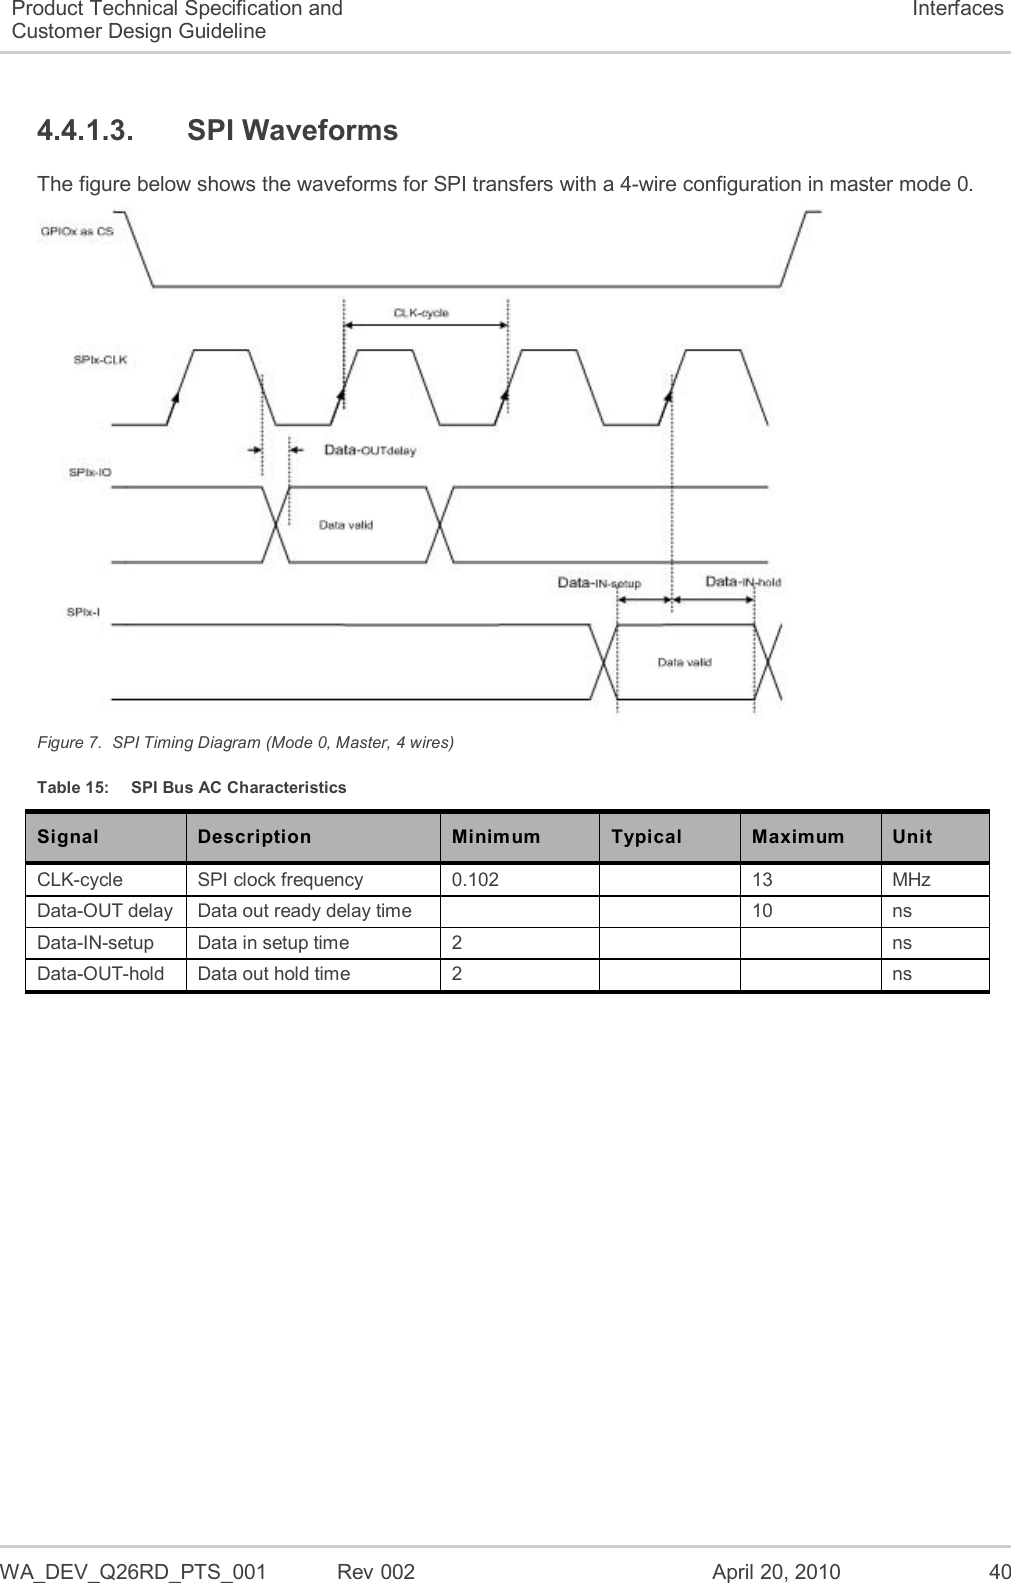  WA_DEV_Q26RD_PTS_001  Rev 002  April 20, 2010 40 Product Technical Specification and Customer Design Guideline Interfaces 4.4.1.3.  SPI Waveforms The figure below shows the waveforms for SPI transfers with a 4-wire configuration in master mode 0.  Figure 7.  SPI Timing Diagram (Mode 0, Master, 4 wires) Table 15:  SPI Bus AC Characteristics Signal Description Minimum Typical Maximum Unit CLK-cycle SPI clock frequency  0.102  13 MHz Data-OUT delay Data out ready delay time   10 ns Data-IN-setup Data in setup time 2   ns Data-OUT-hold Data out hold time 2   ns  